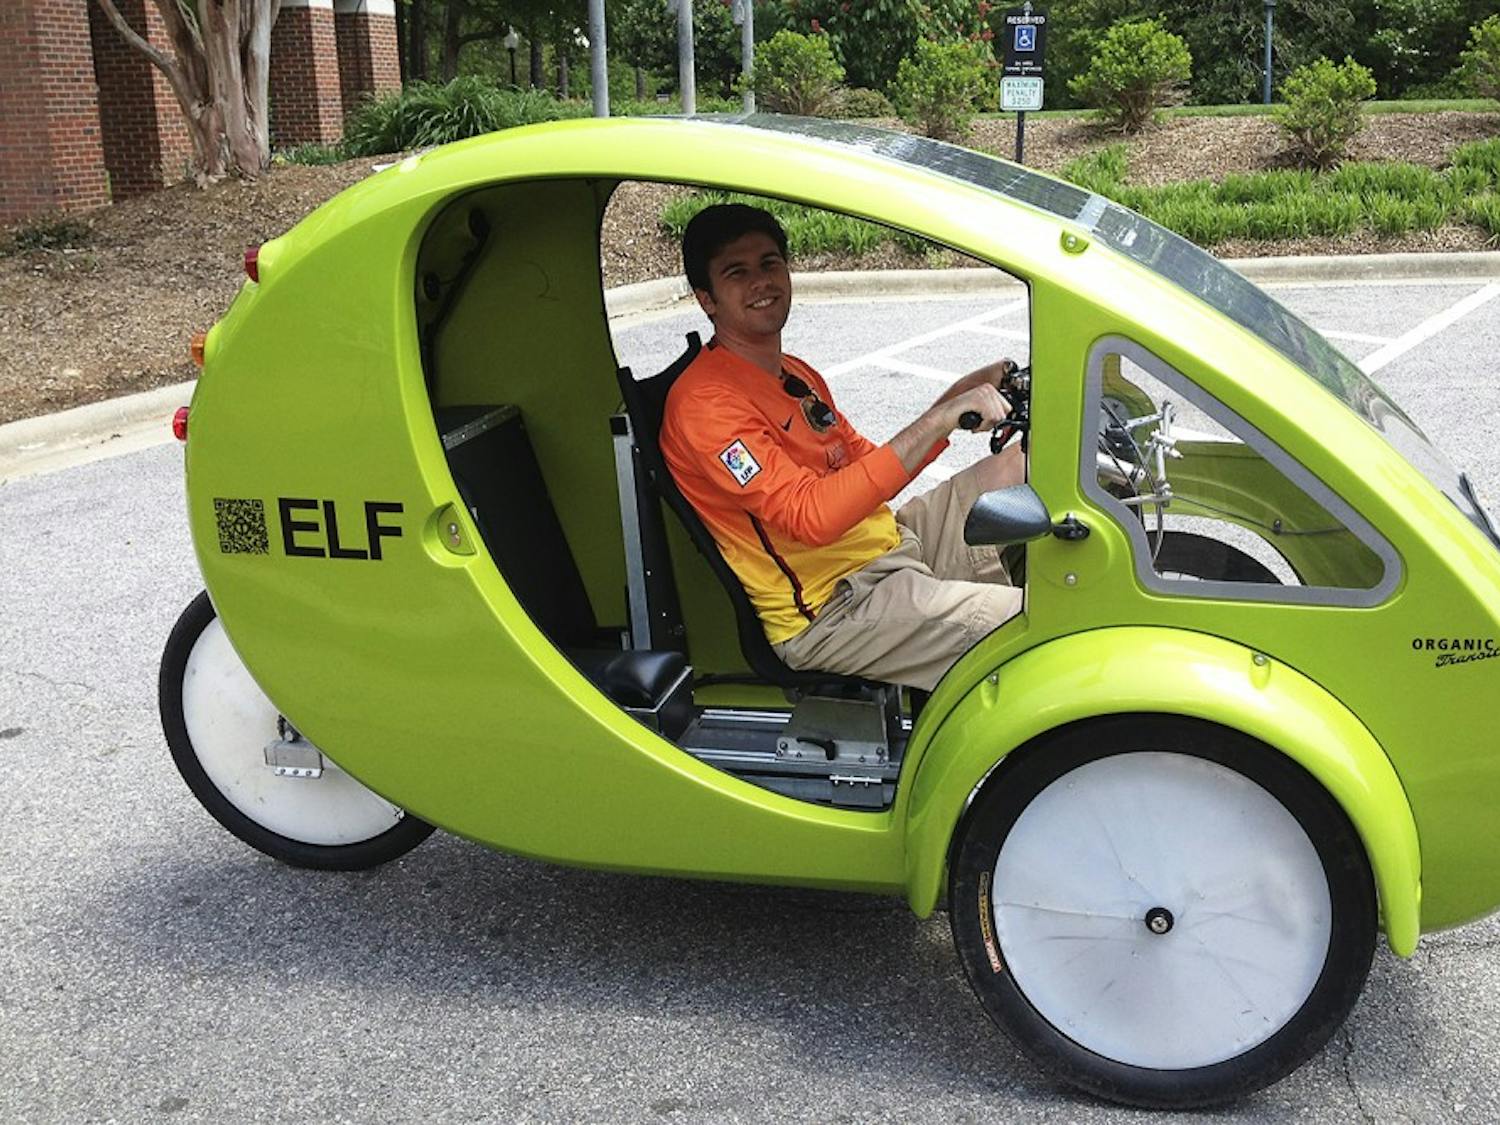 Patrick White, a senior business major, tests out an alternative form of transportation, a one-person-electrical bicycle called an ELF, in the parking lot of Kenan-Flagler on Monday afternoon.